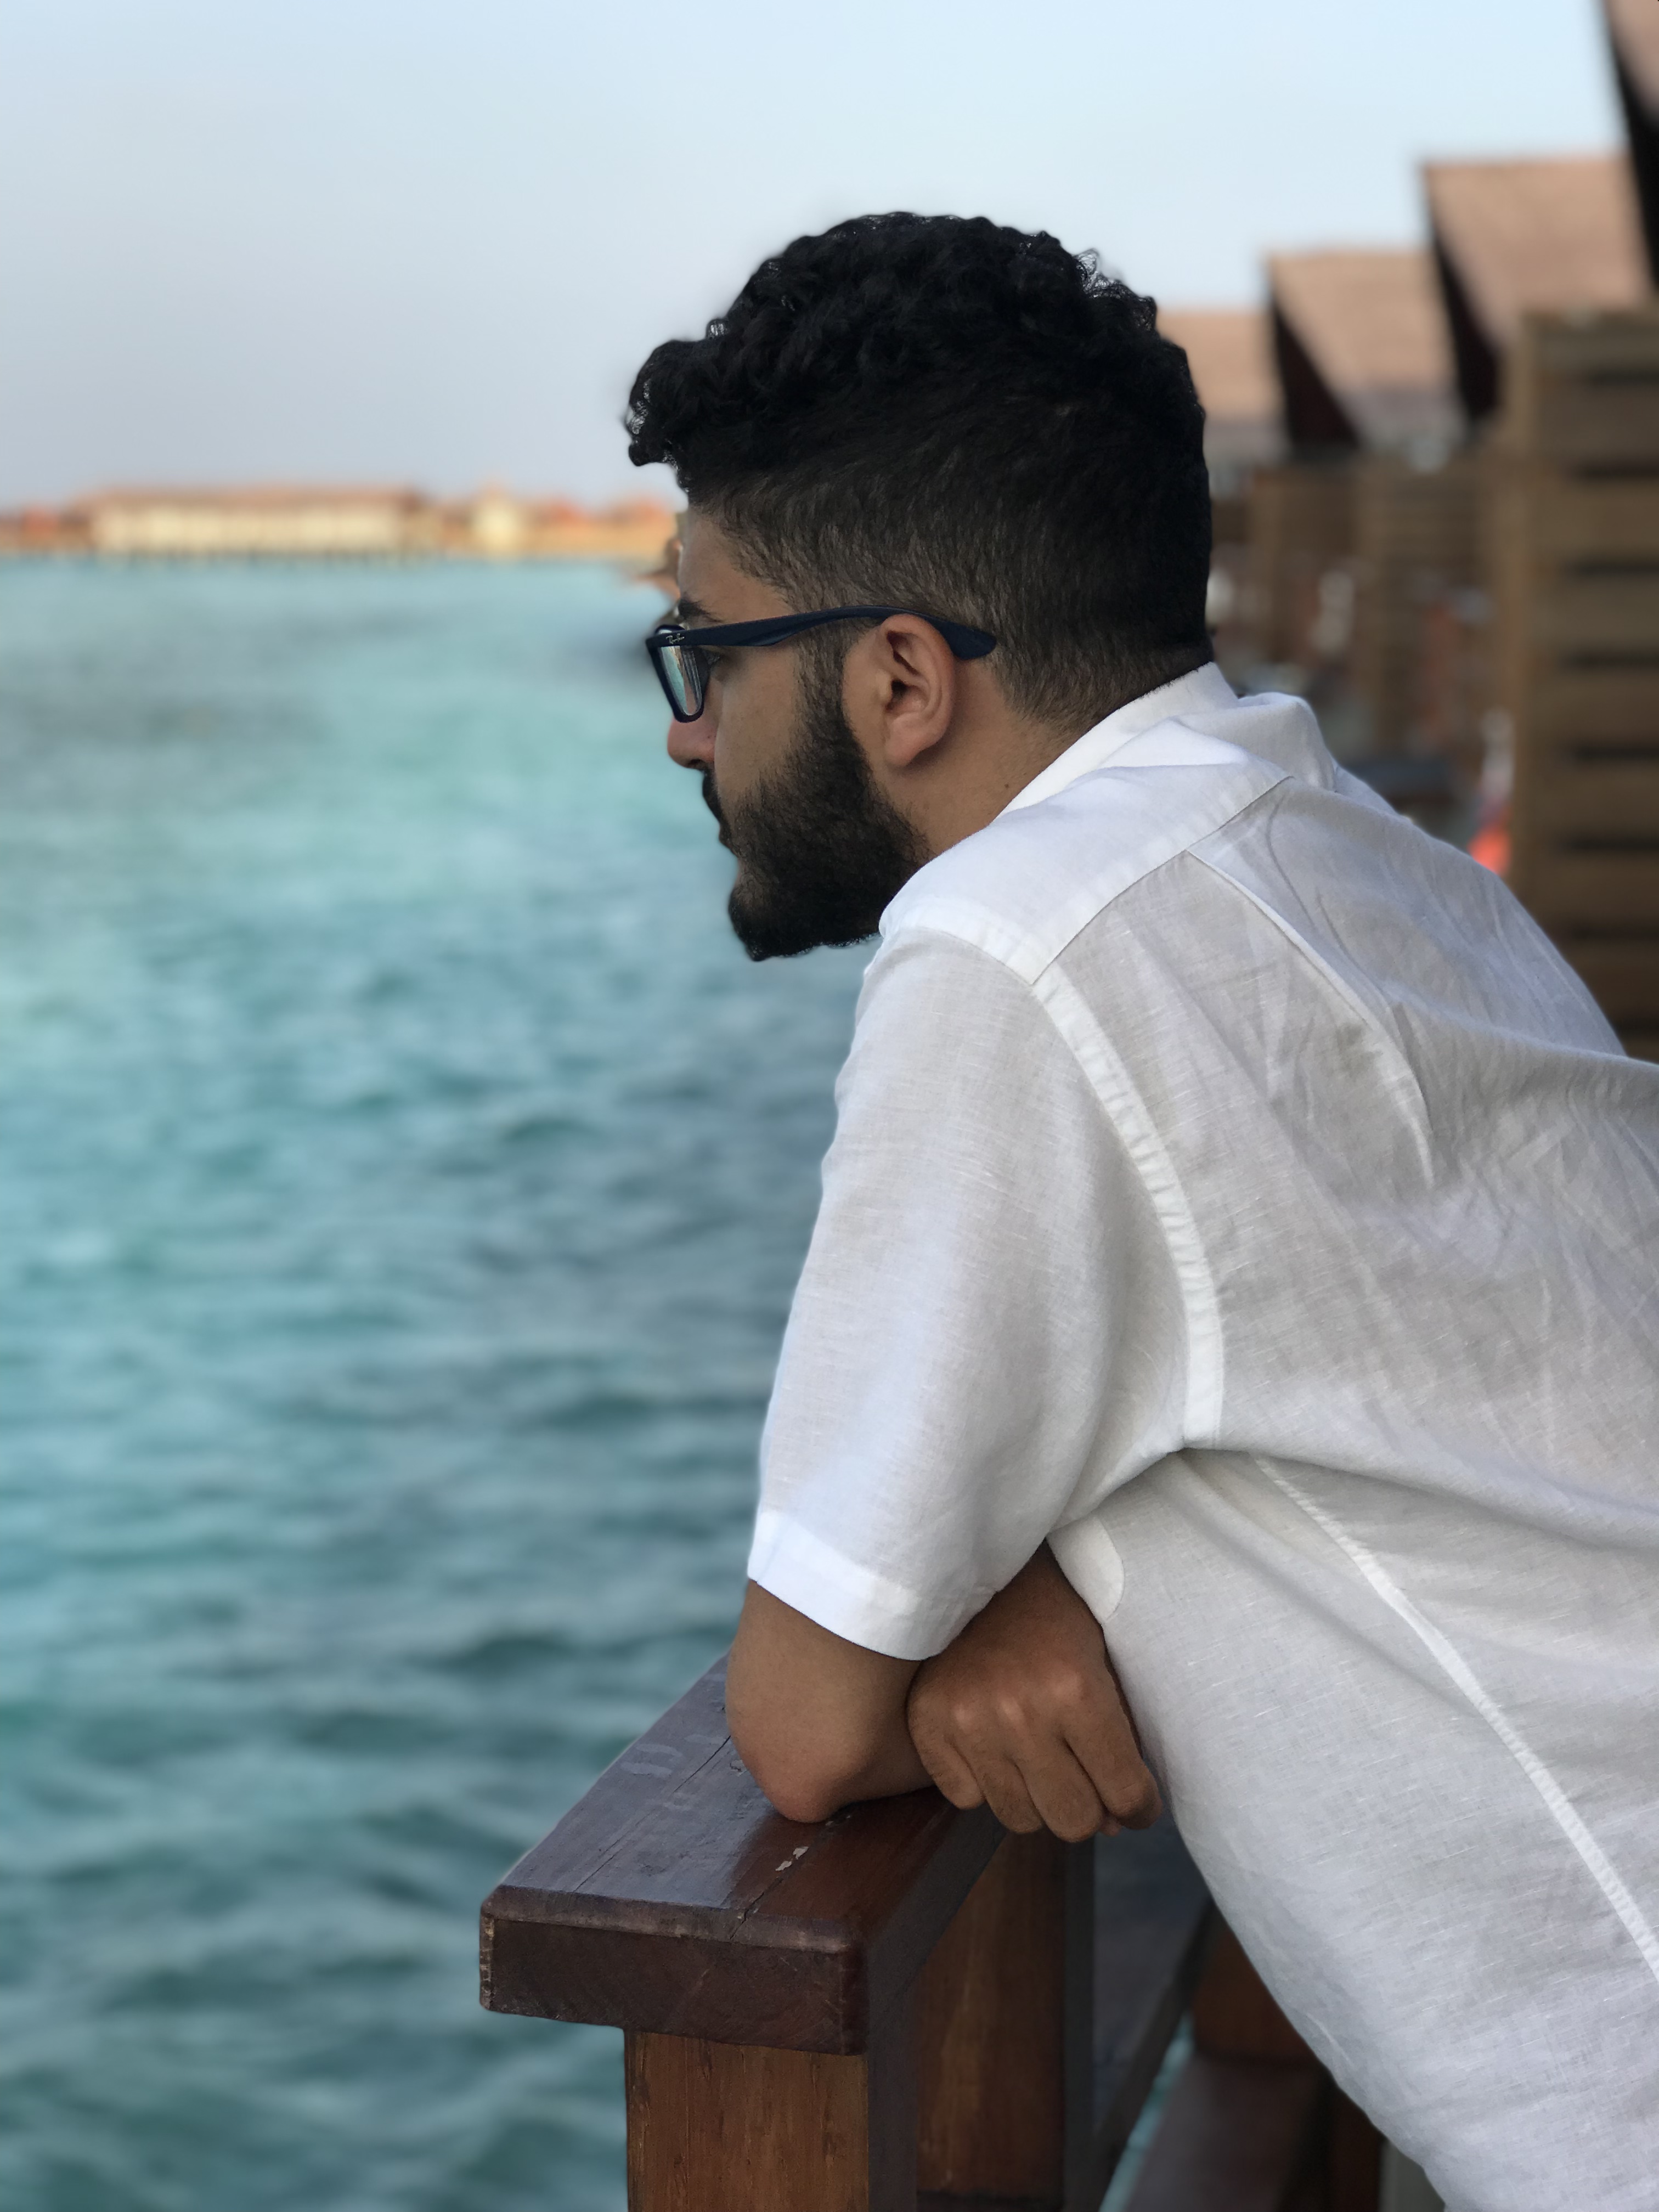 Me looking at the ocean in the Maldives, January 2019